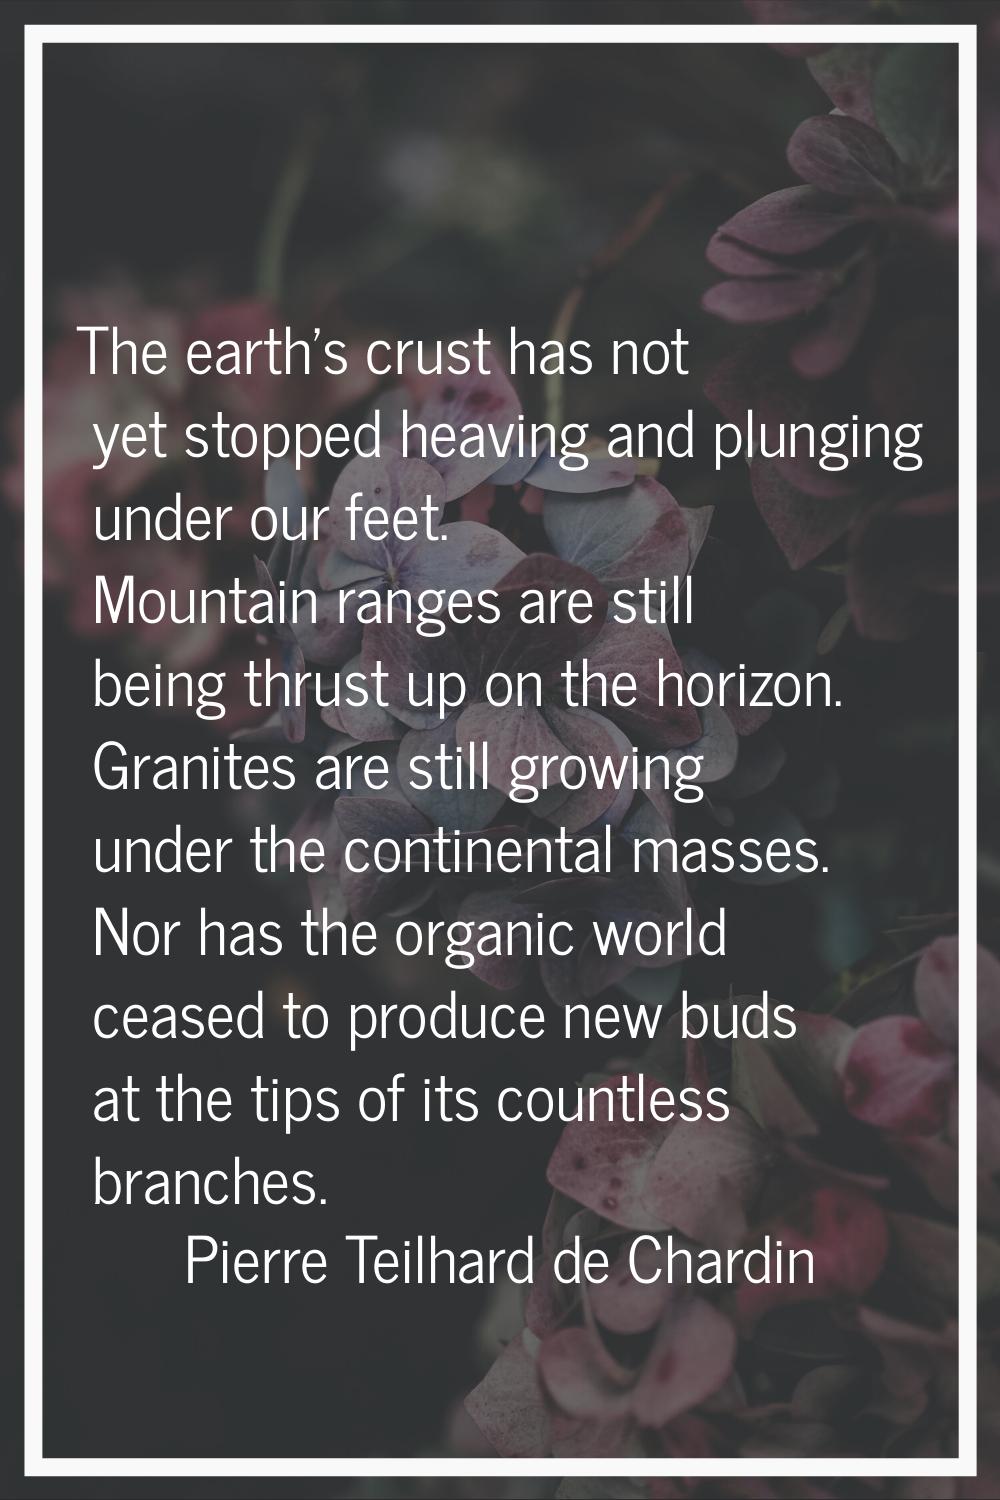 The earth's crust has not yet stopped heaving and plunging under our feet. Mountain ranges are stil